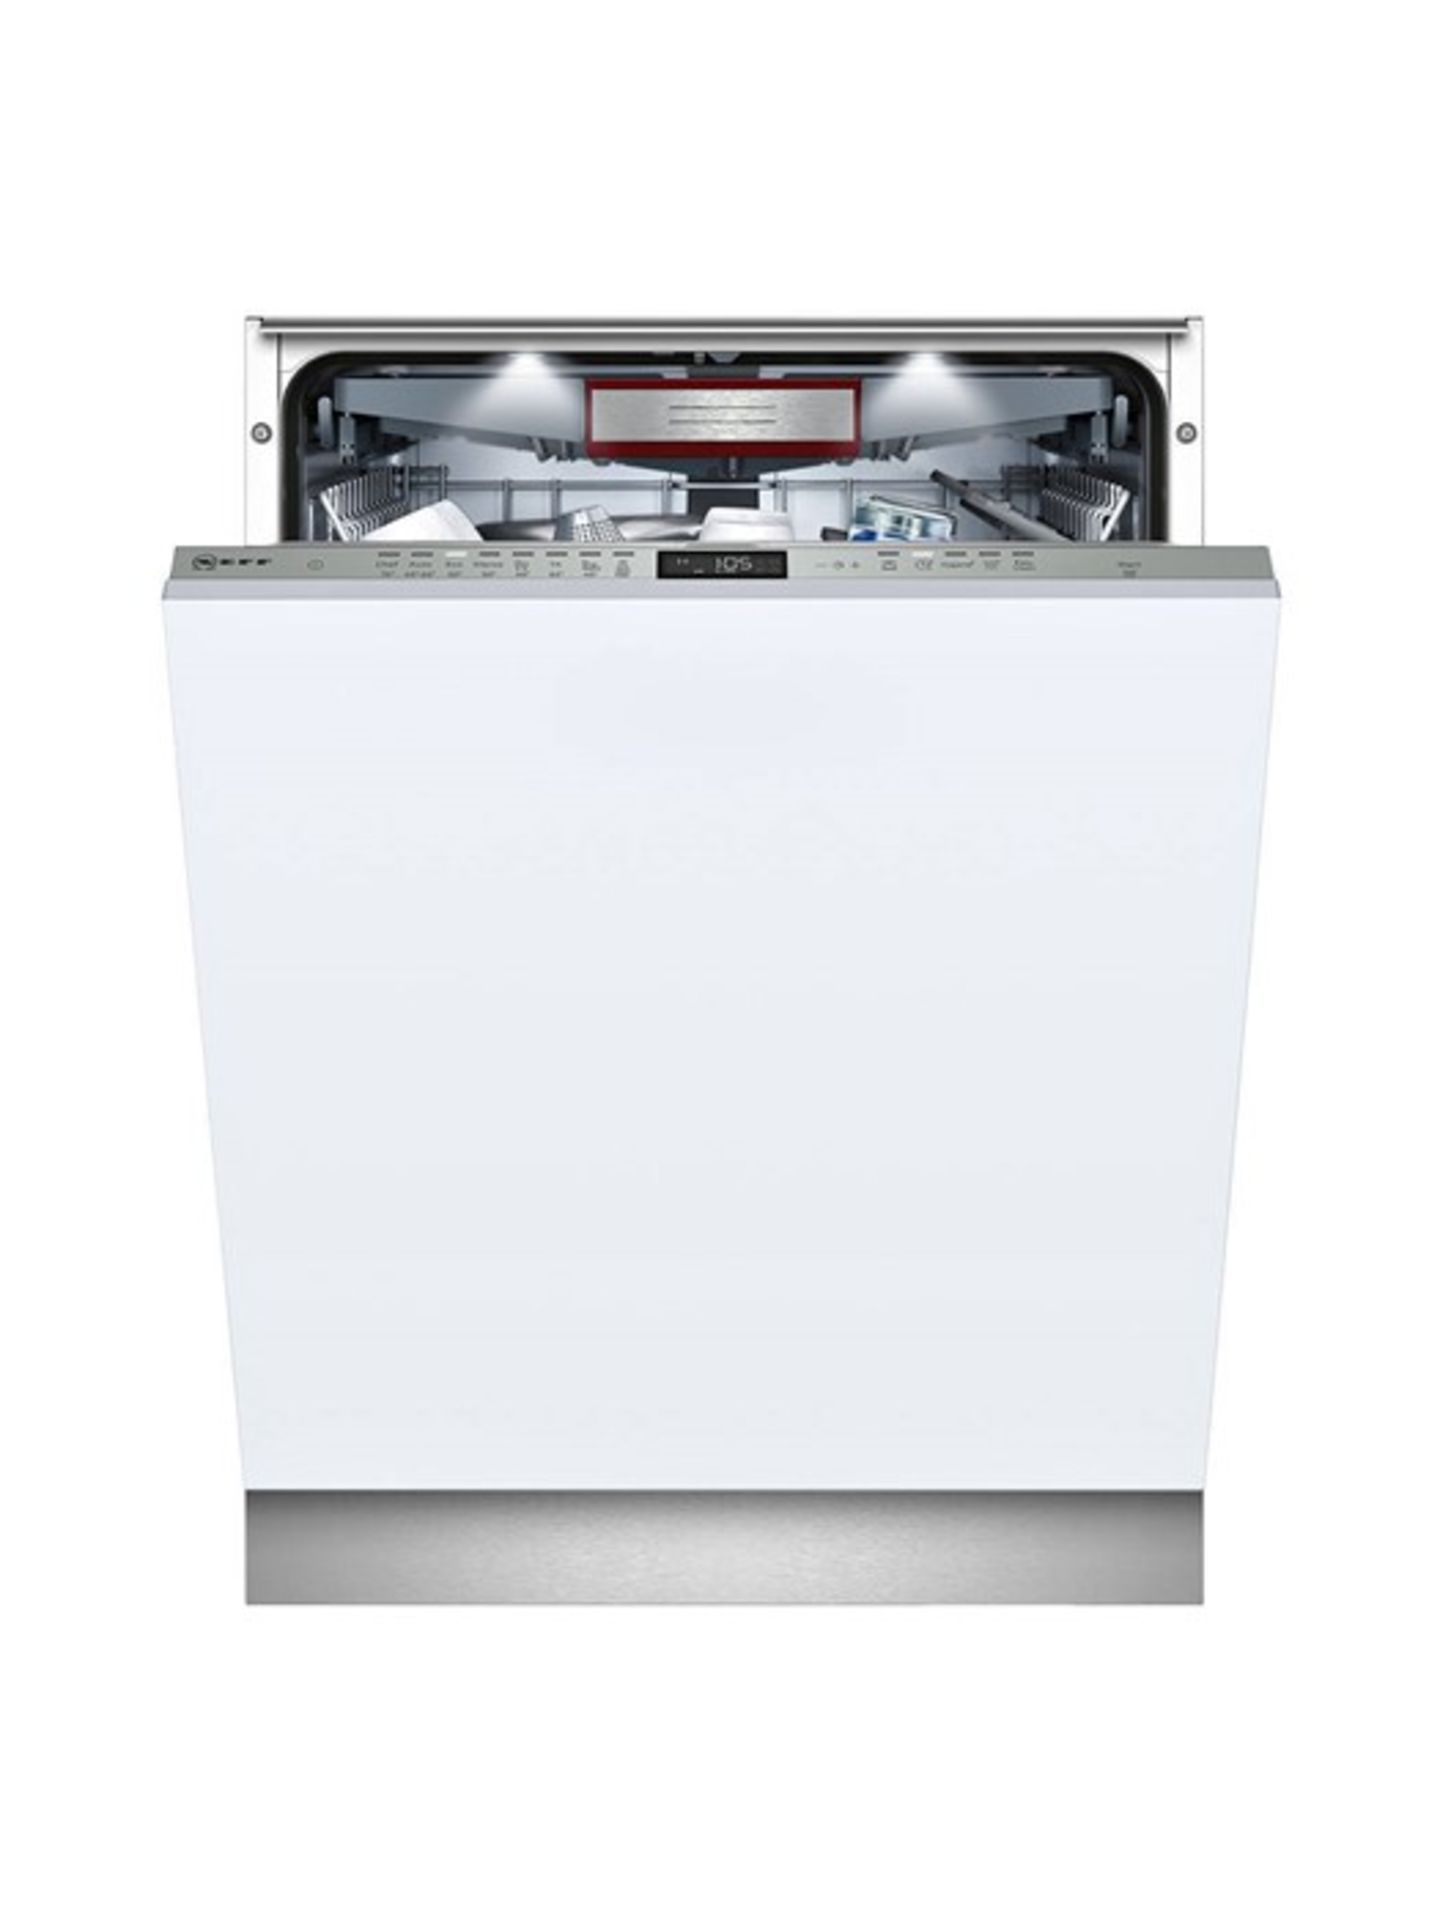 1 / NEFF FULLY INTEGRATED DISHWASHER S515T80D1G BR